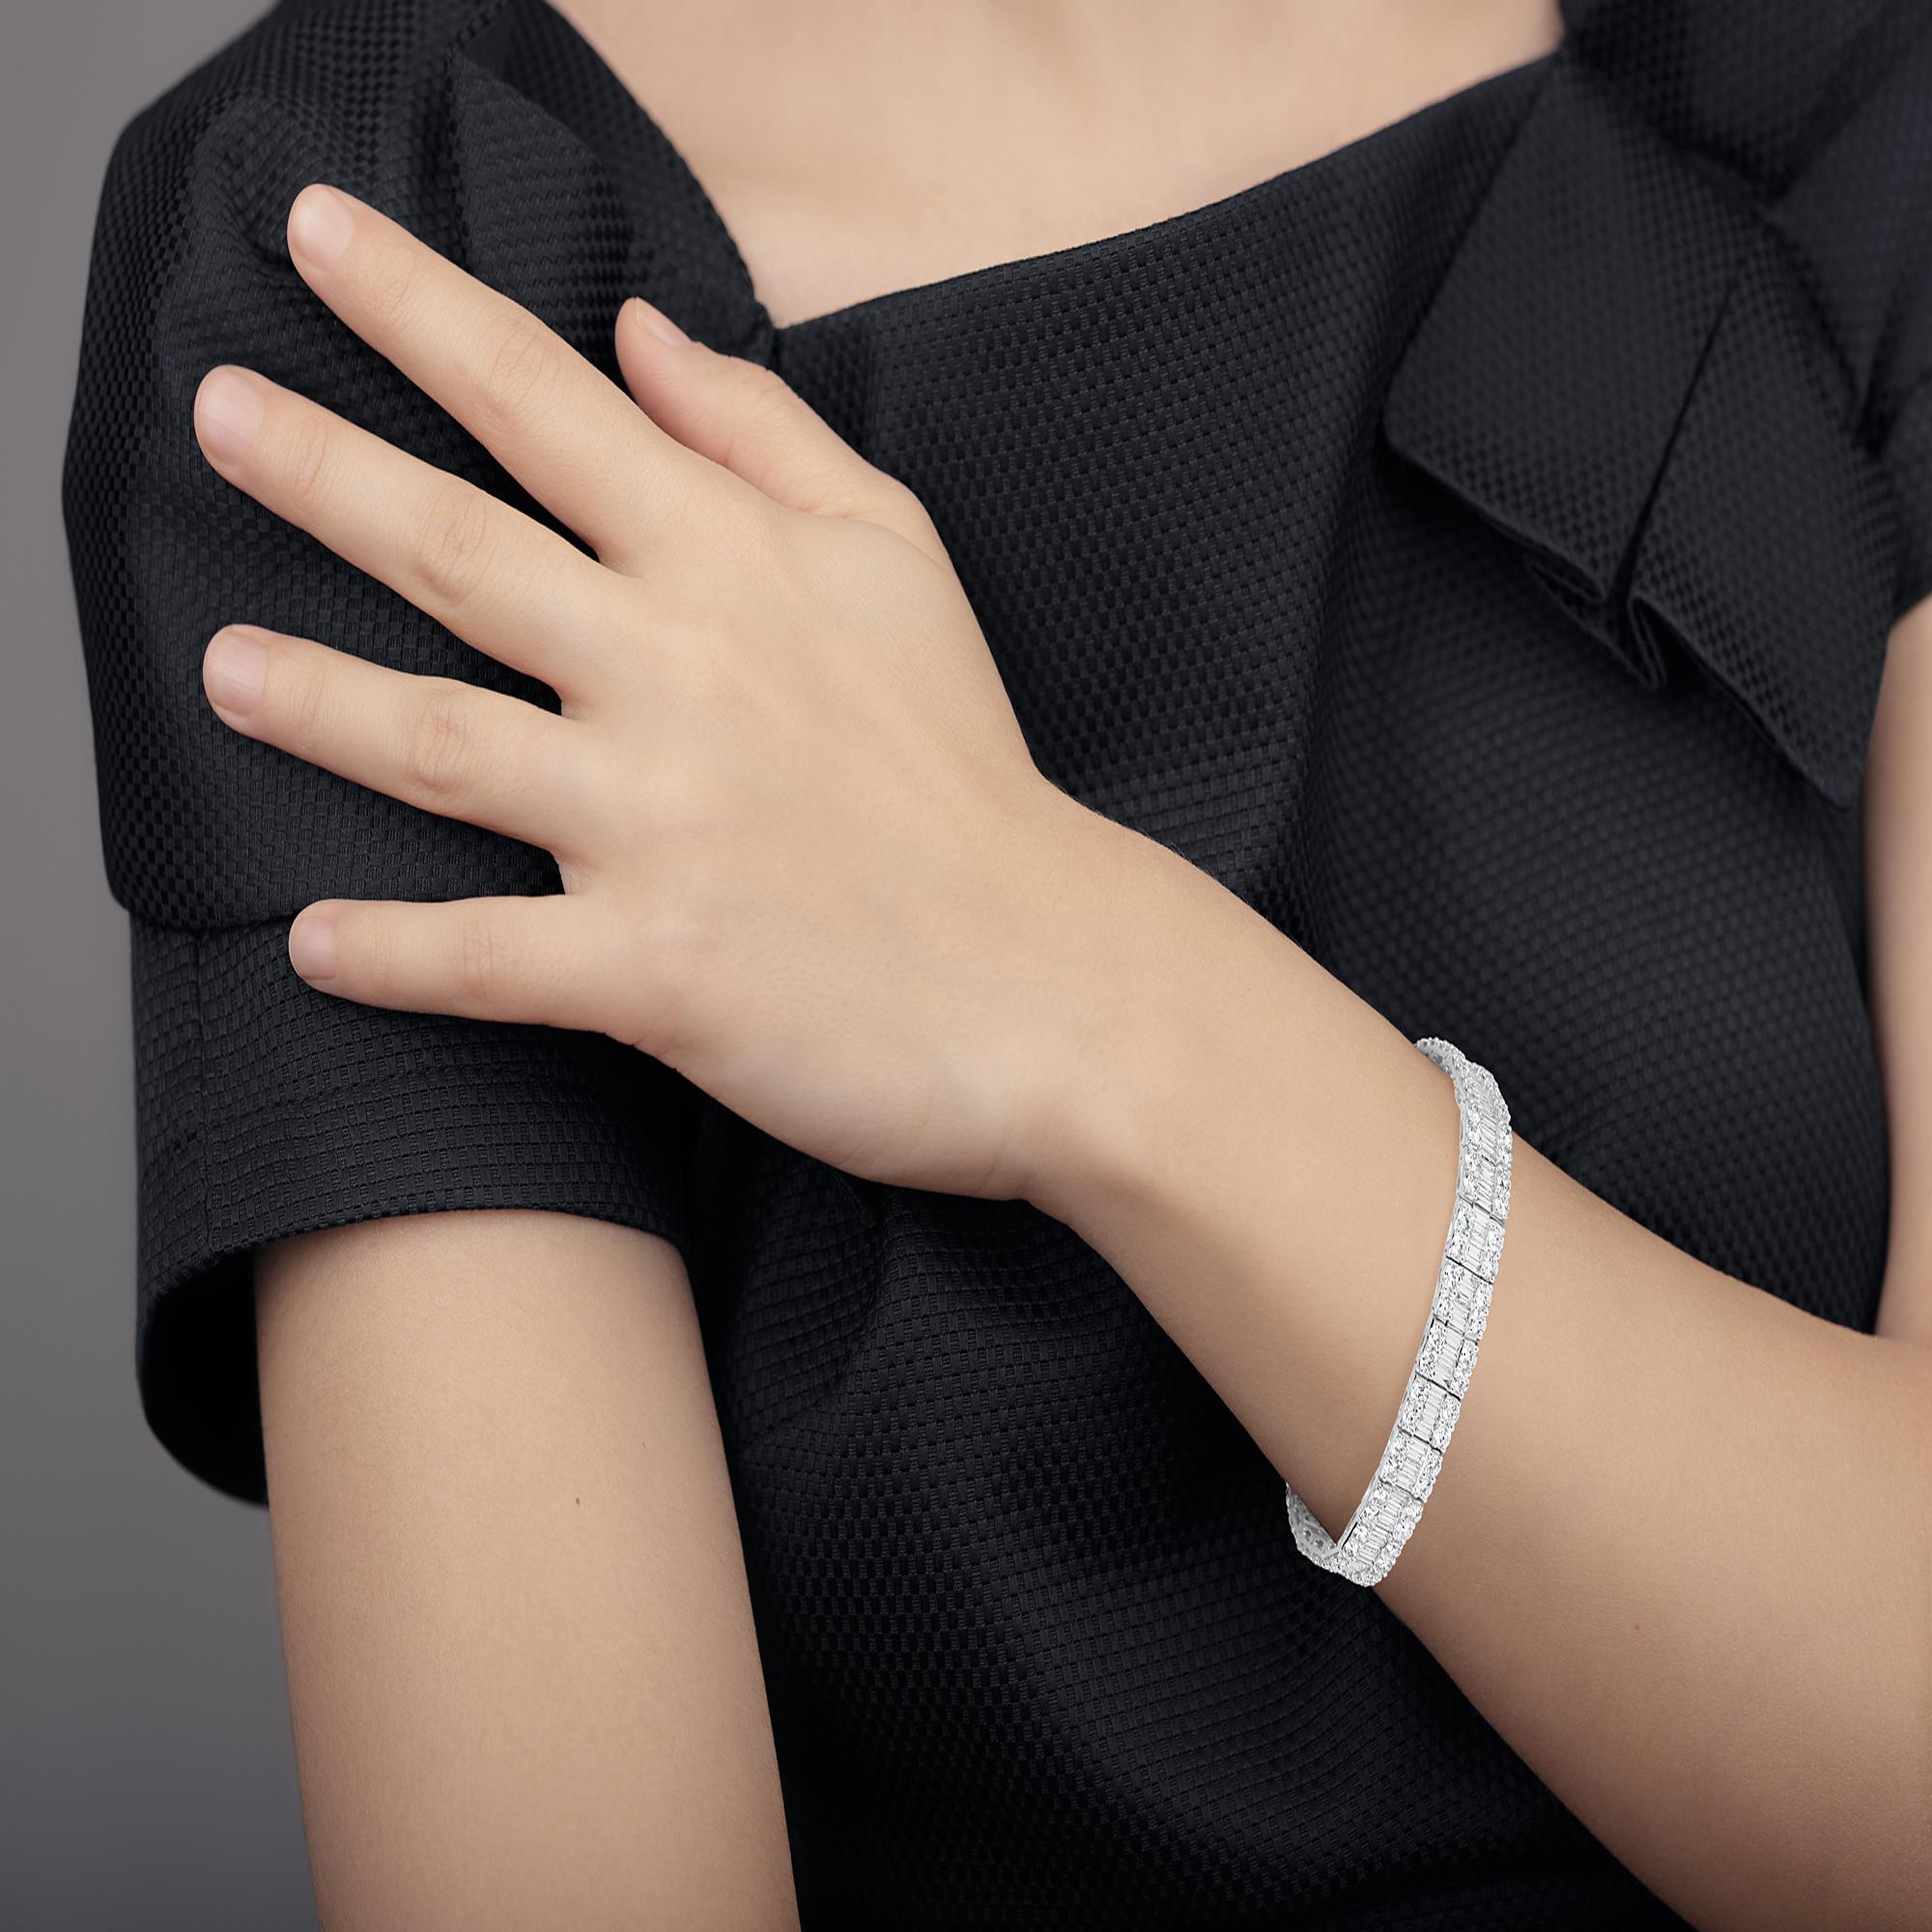 Classy and luxurious Natural Baguette Diamond Bracelet by Almor Designs. This 14.51 Carat Natural Baguette Diamond Bracelet features 9.90 Carats of Round White Diamonds and 4.61 Carats of Baguette Diamonds. All of the diamonds are G-H Color and SI1